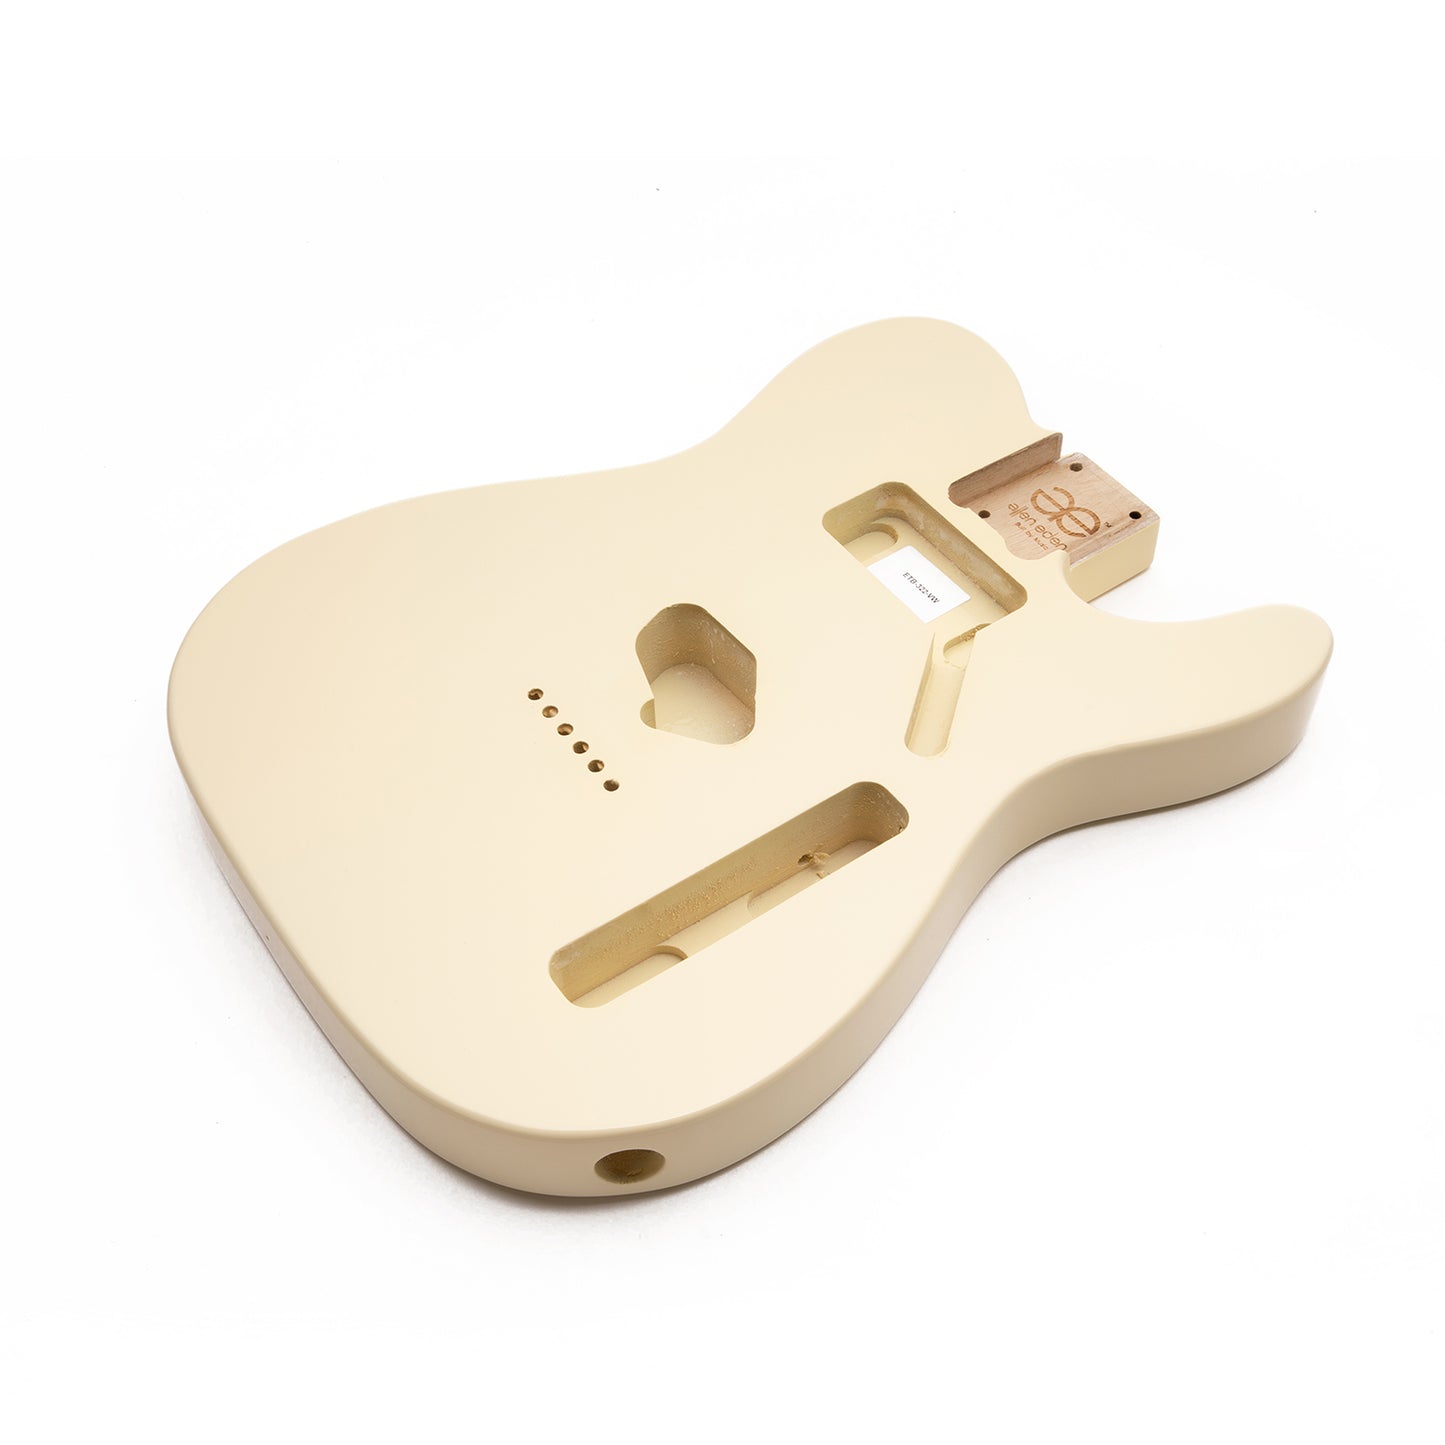 AE Guitars® T-Style Paulownia Replacement Guitar Body Vintage White